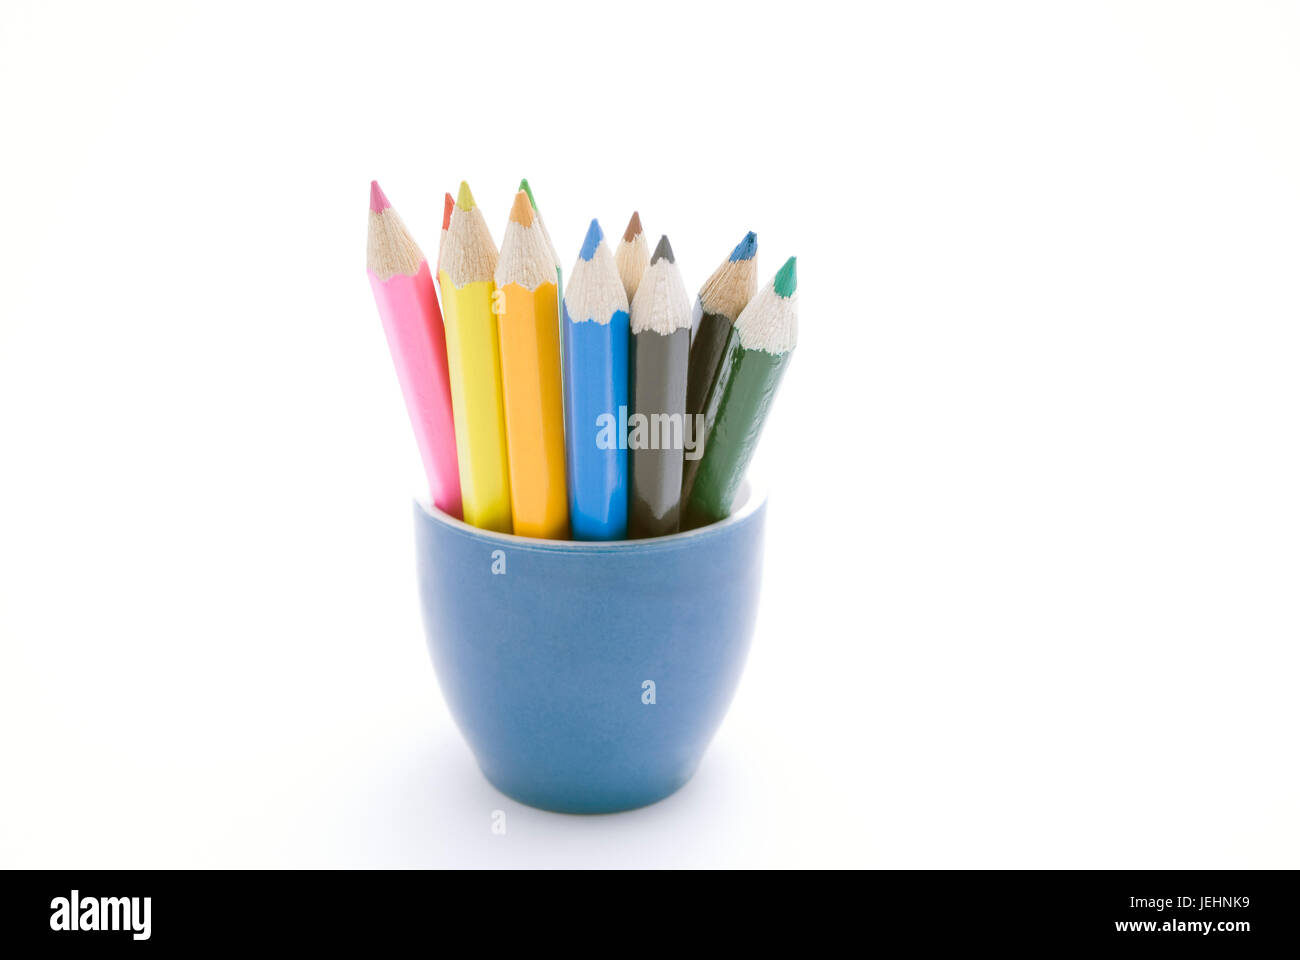 Set of coloured pencils in a blue ceramic container against a white background.  Pencil colours:  pink; red; yellow; green; orange/ochre; light blue;  Stock Photo